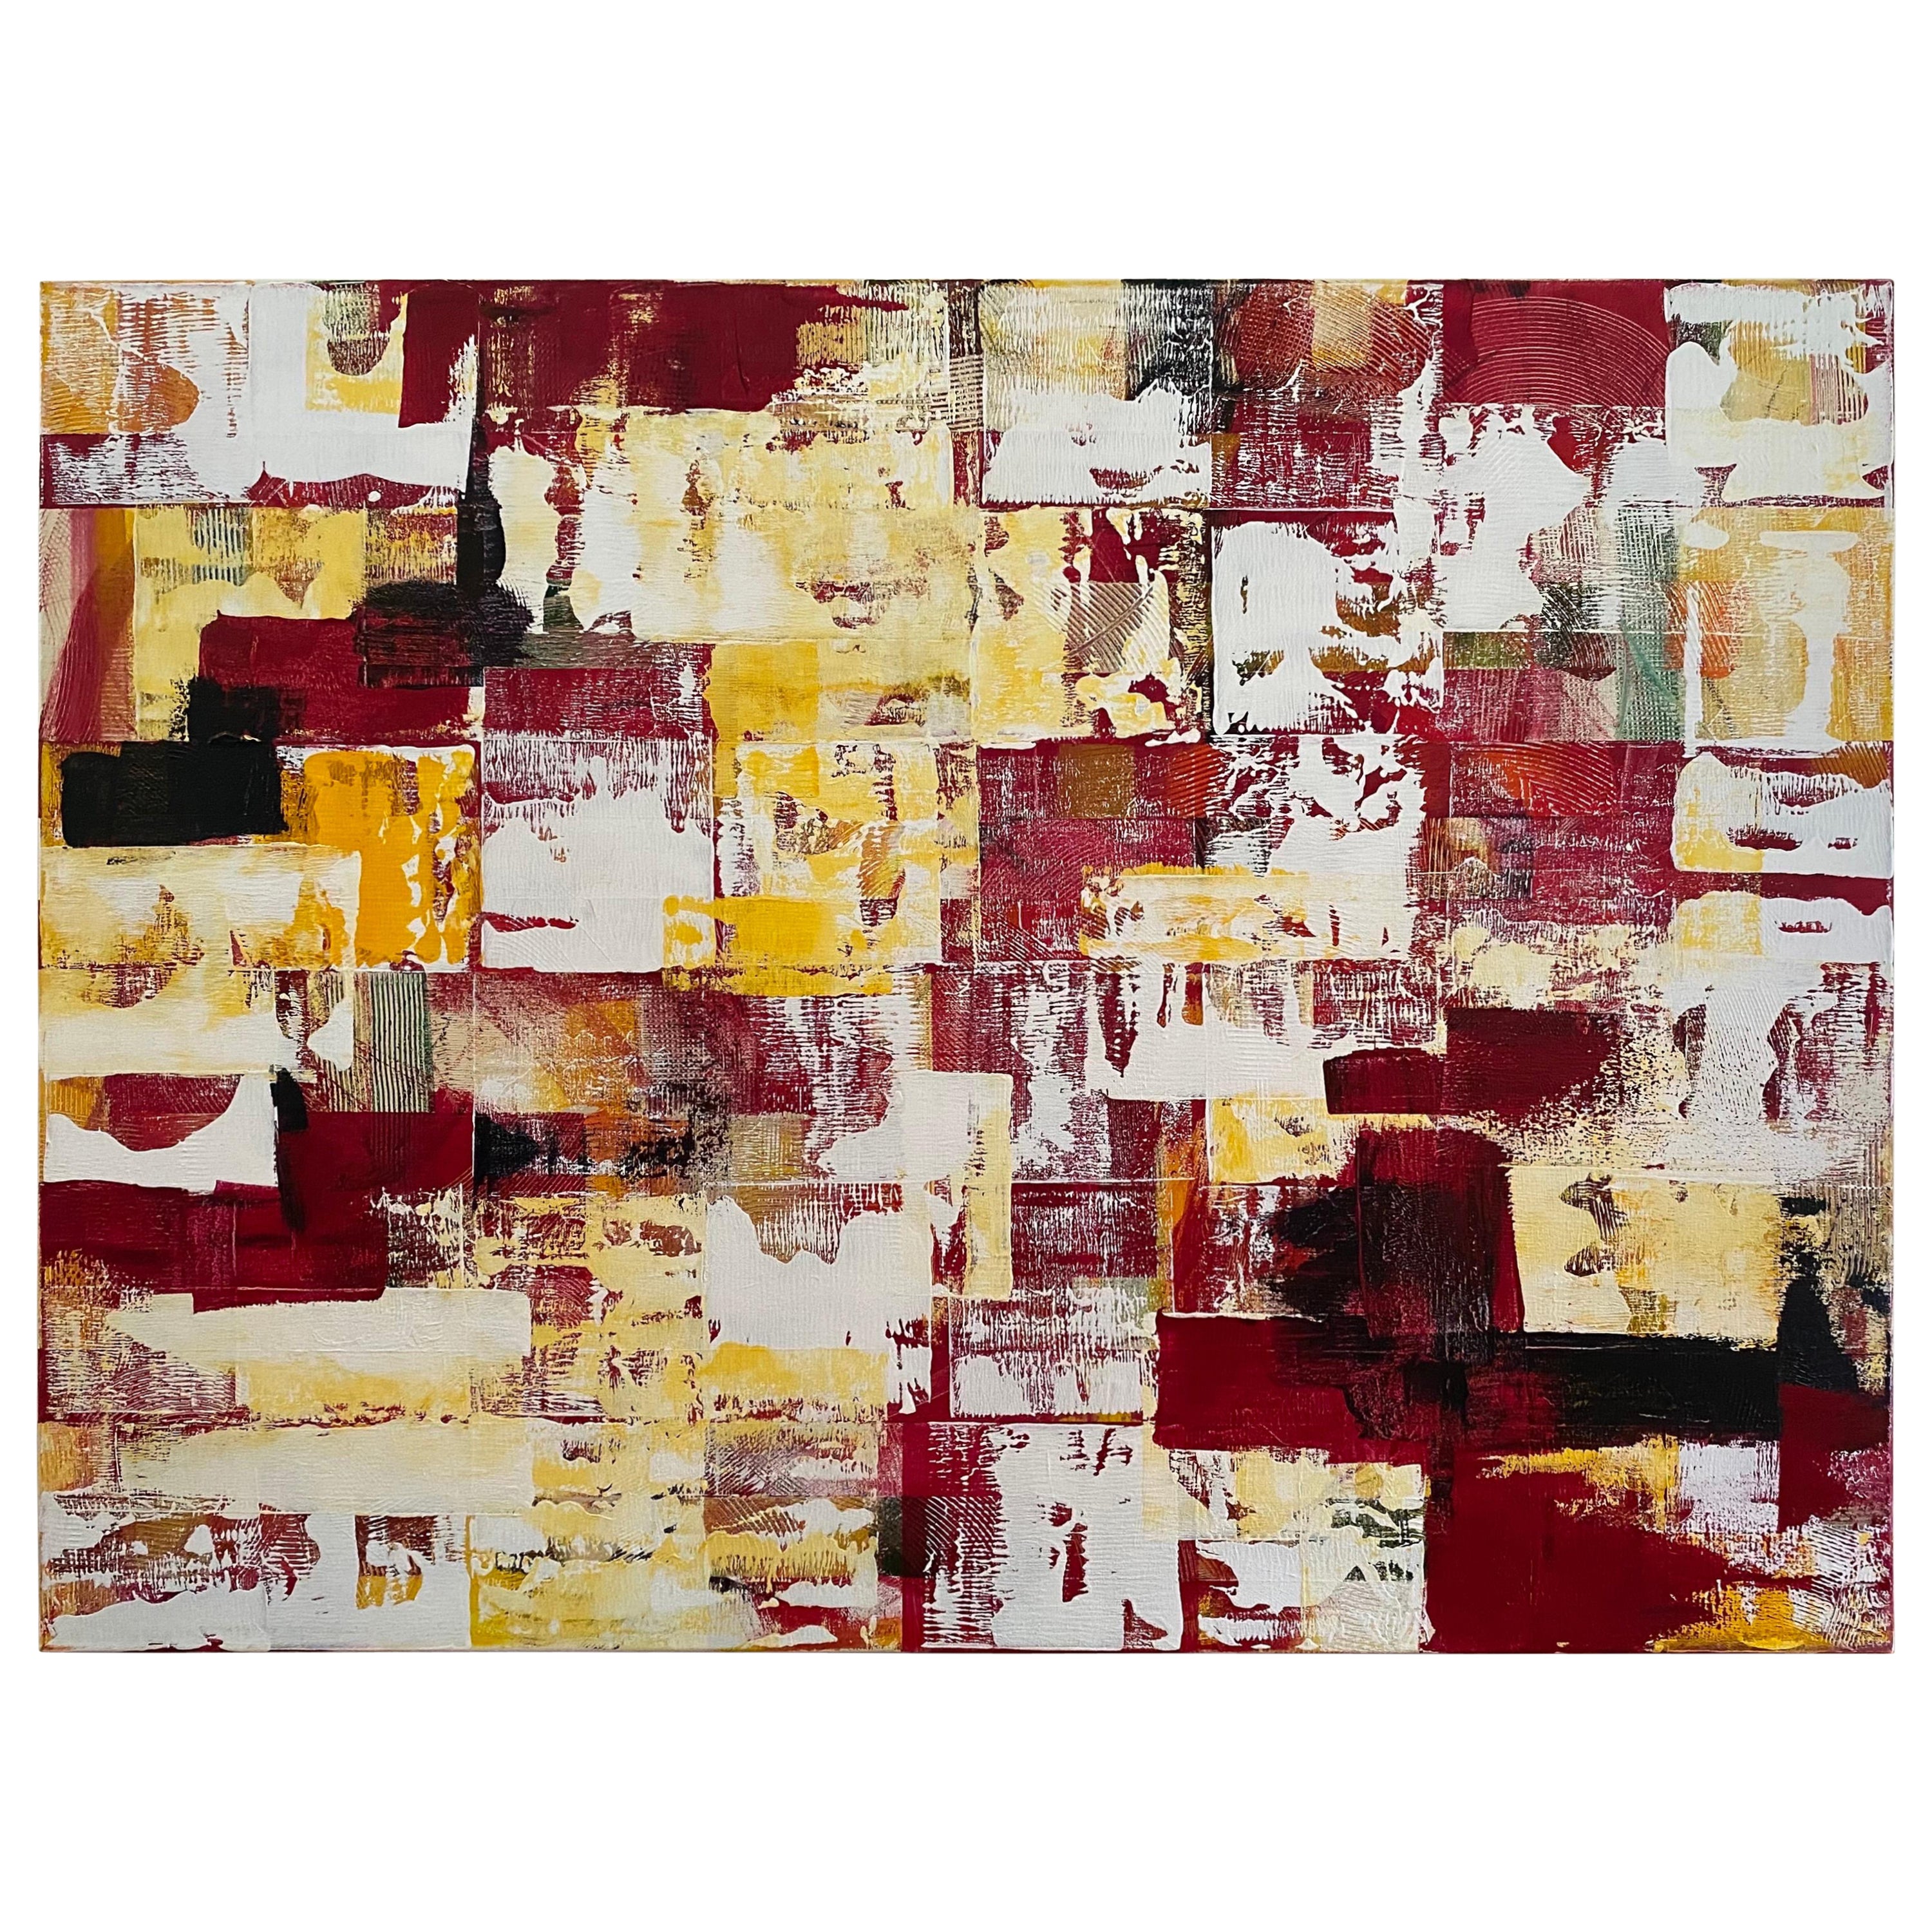 Large Red & Yellow Abstract Painting Titled "Geranium" by Rebecca Ruoff, 2021 For Sale